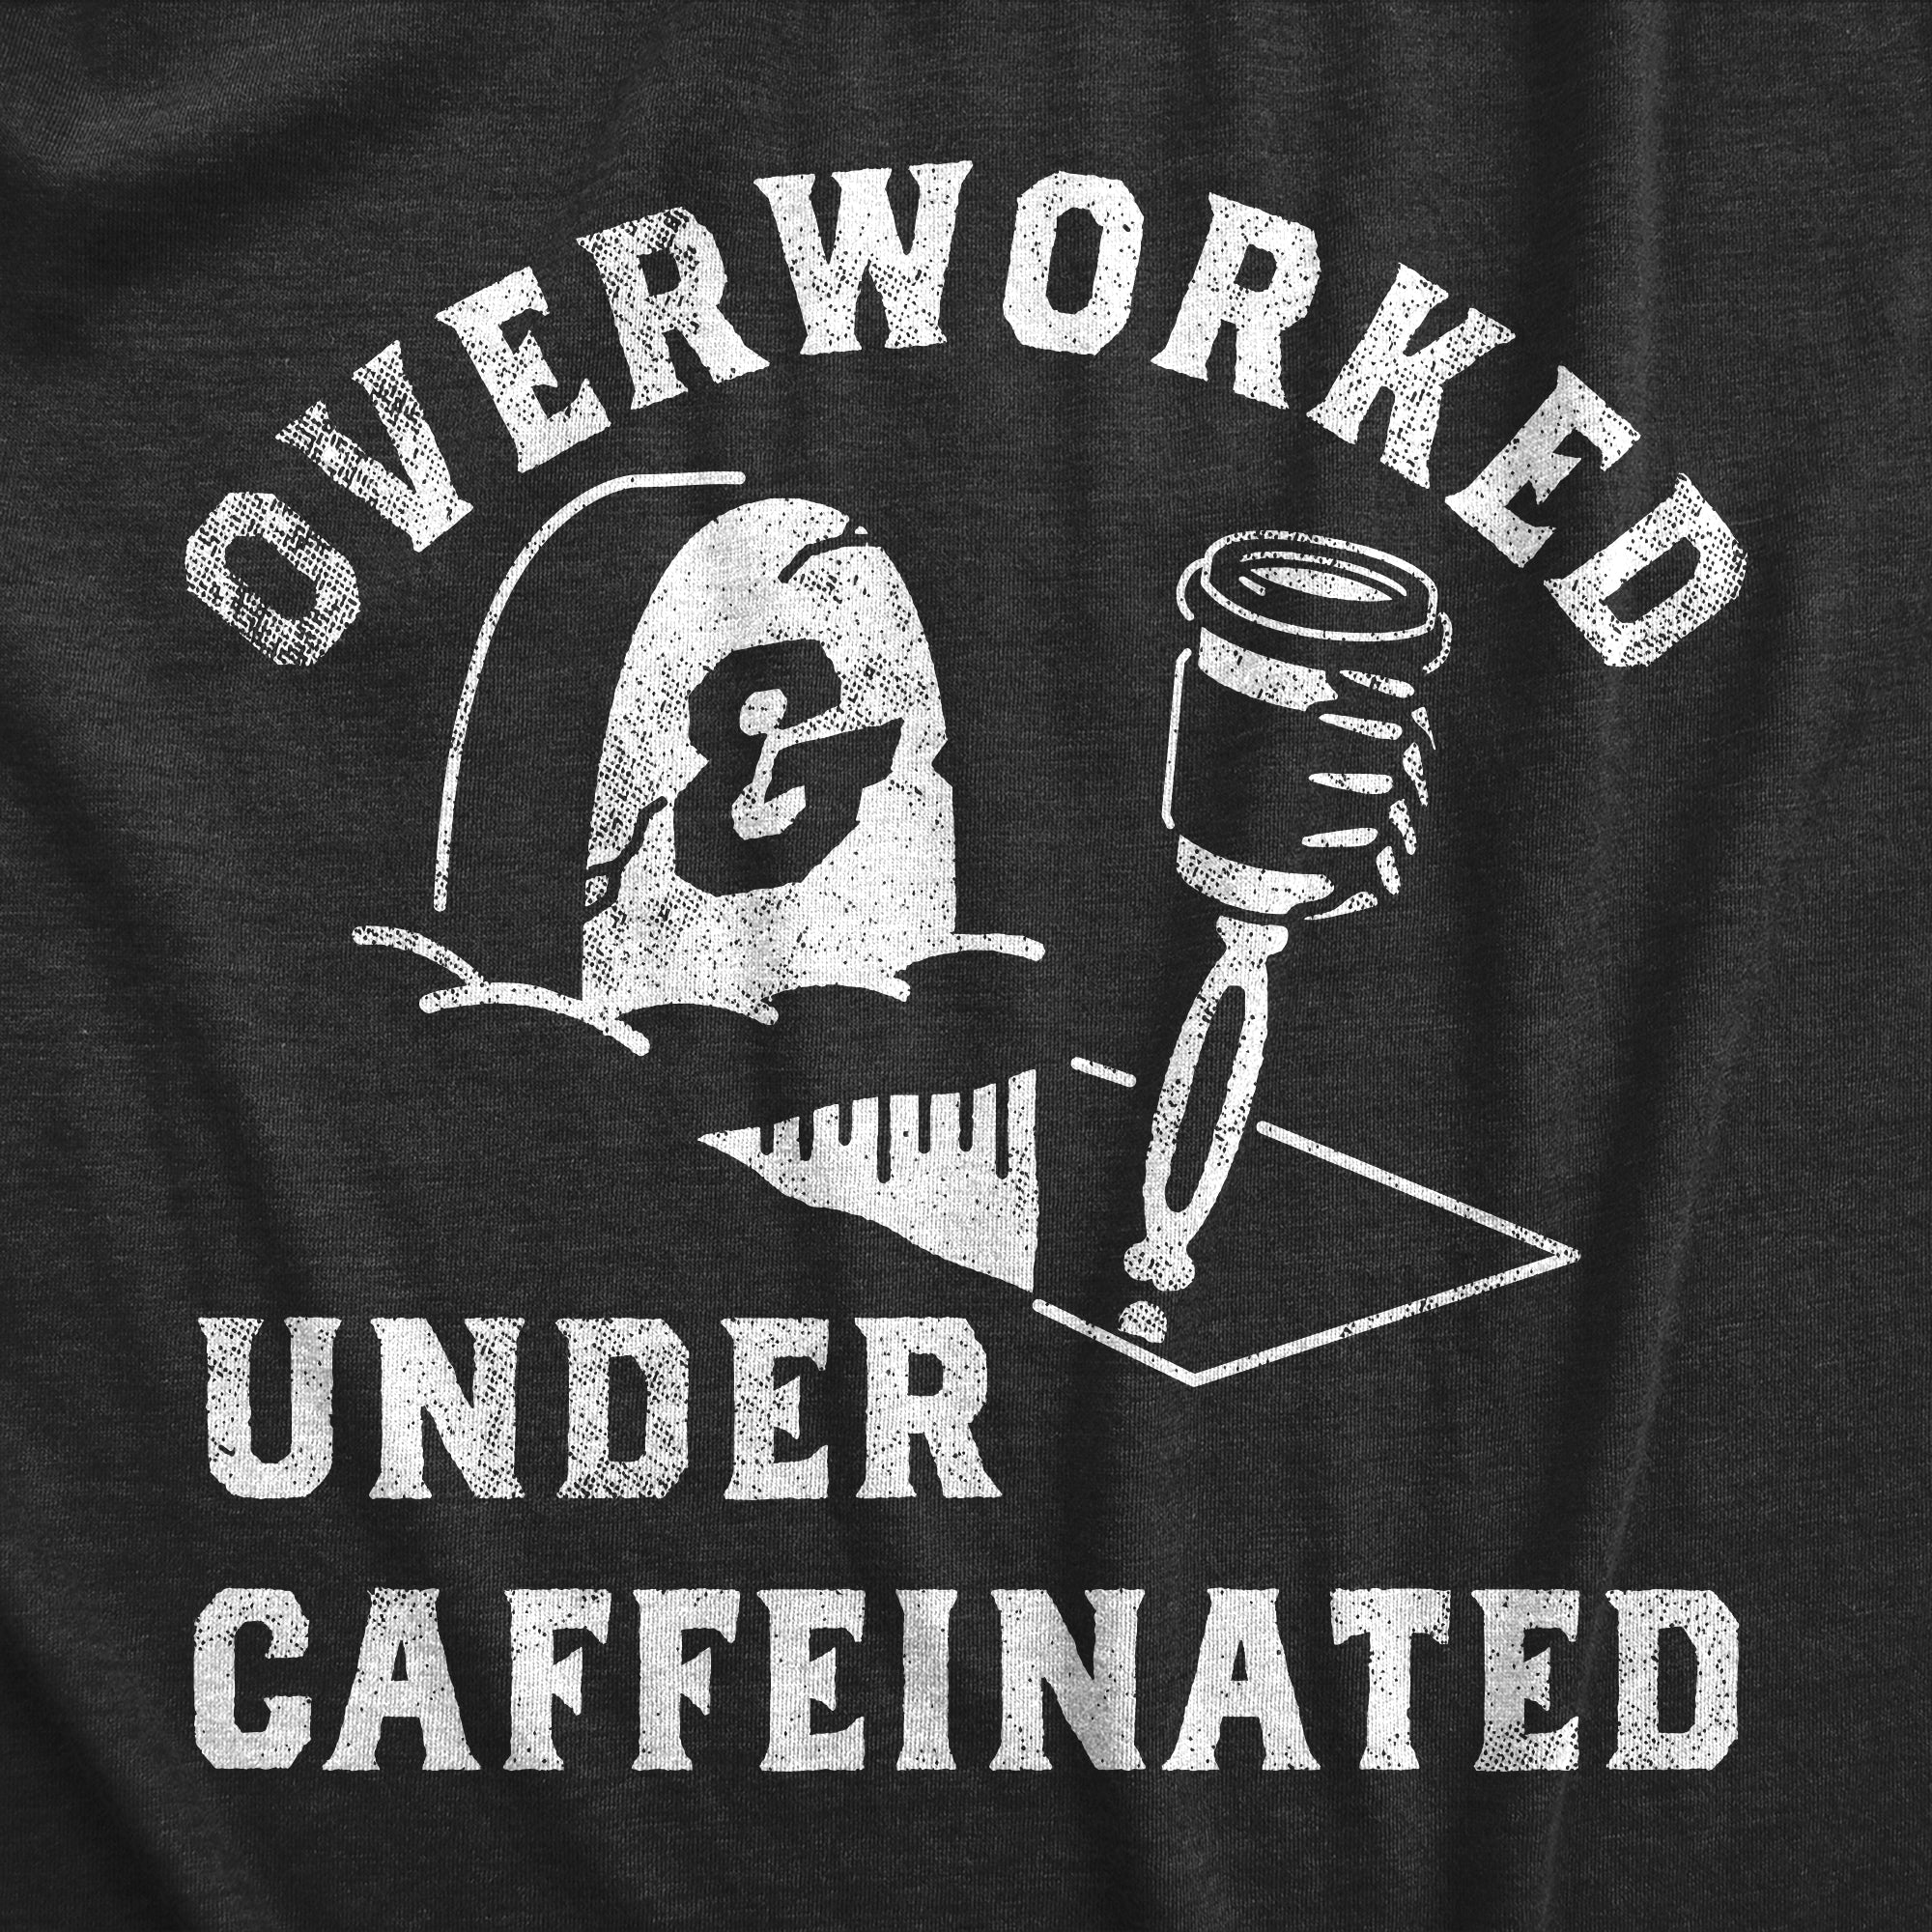 Funny Heather Black - OVERWORKED Overworked And Undercaffeinated Mens T Shirt Nerdy Coffee office Tee